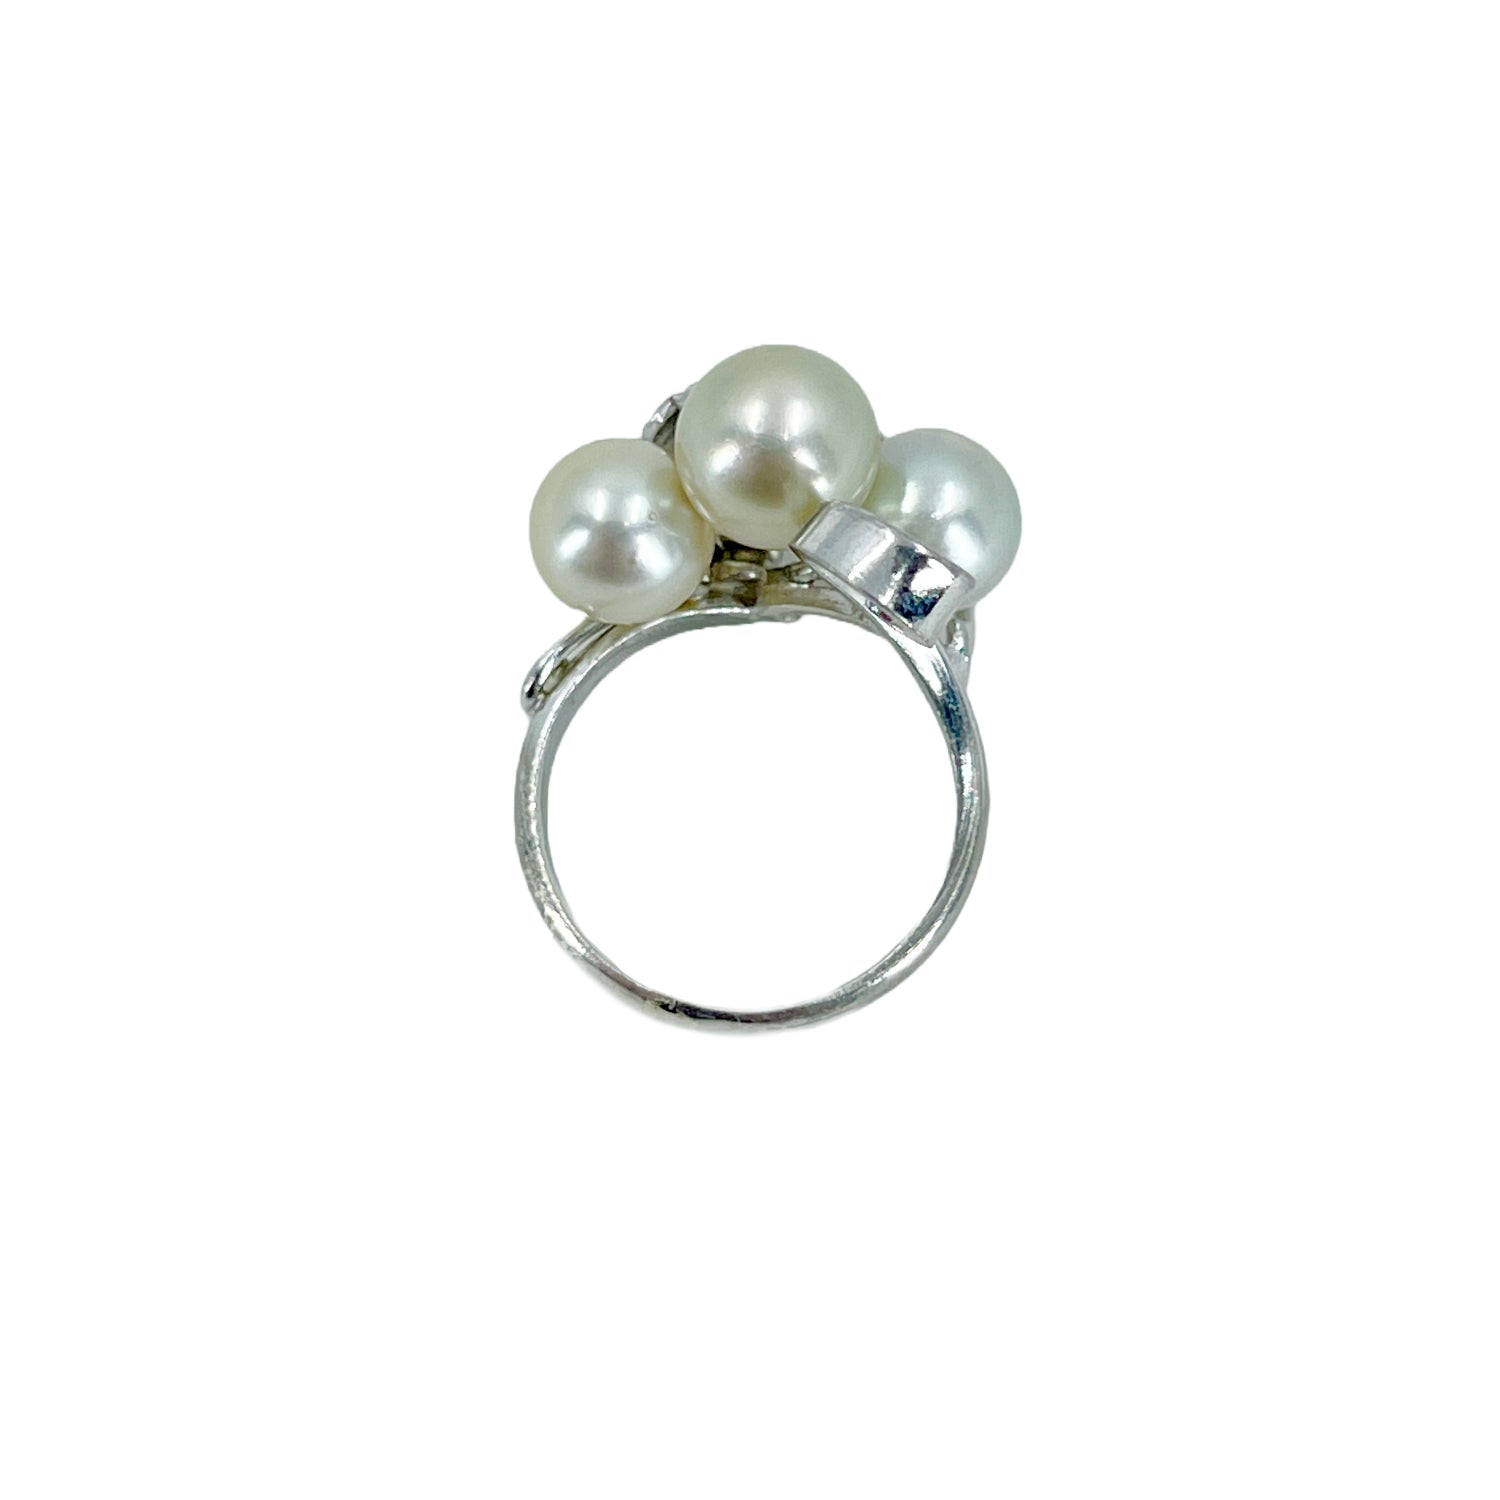 Grape Blue Gray Japanese Saltwater Akoya Cultured Pearl Vintage Ring- Sterling Silver Sz 5